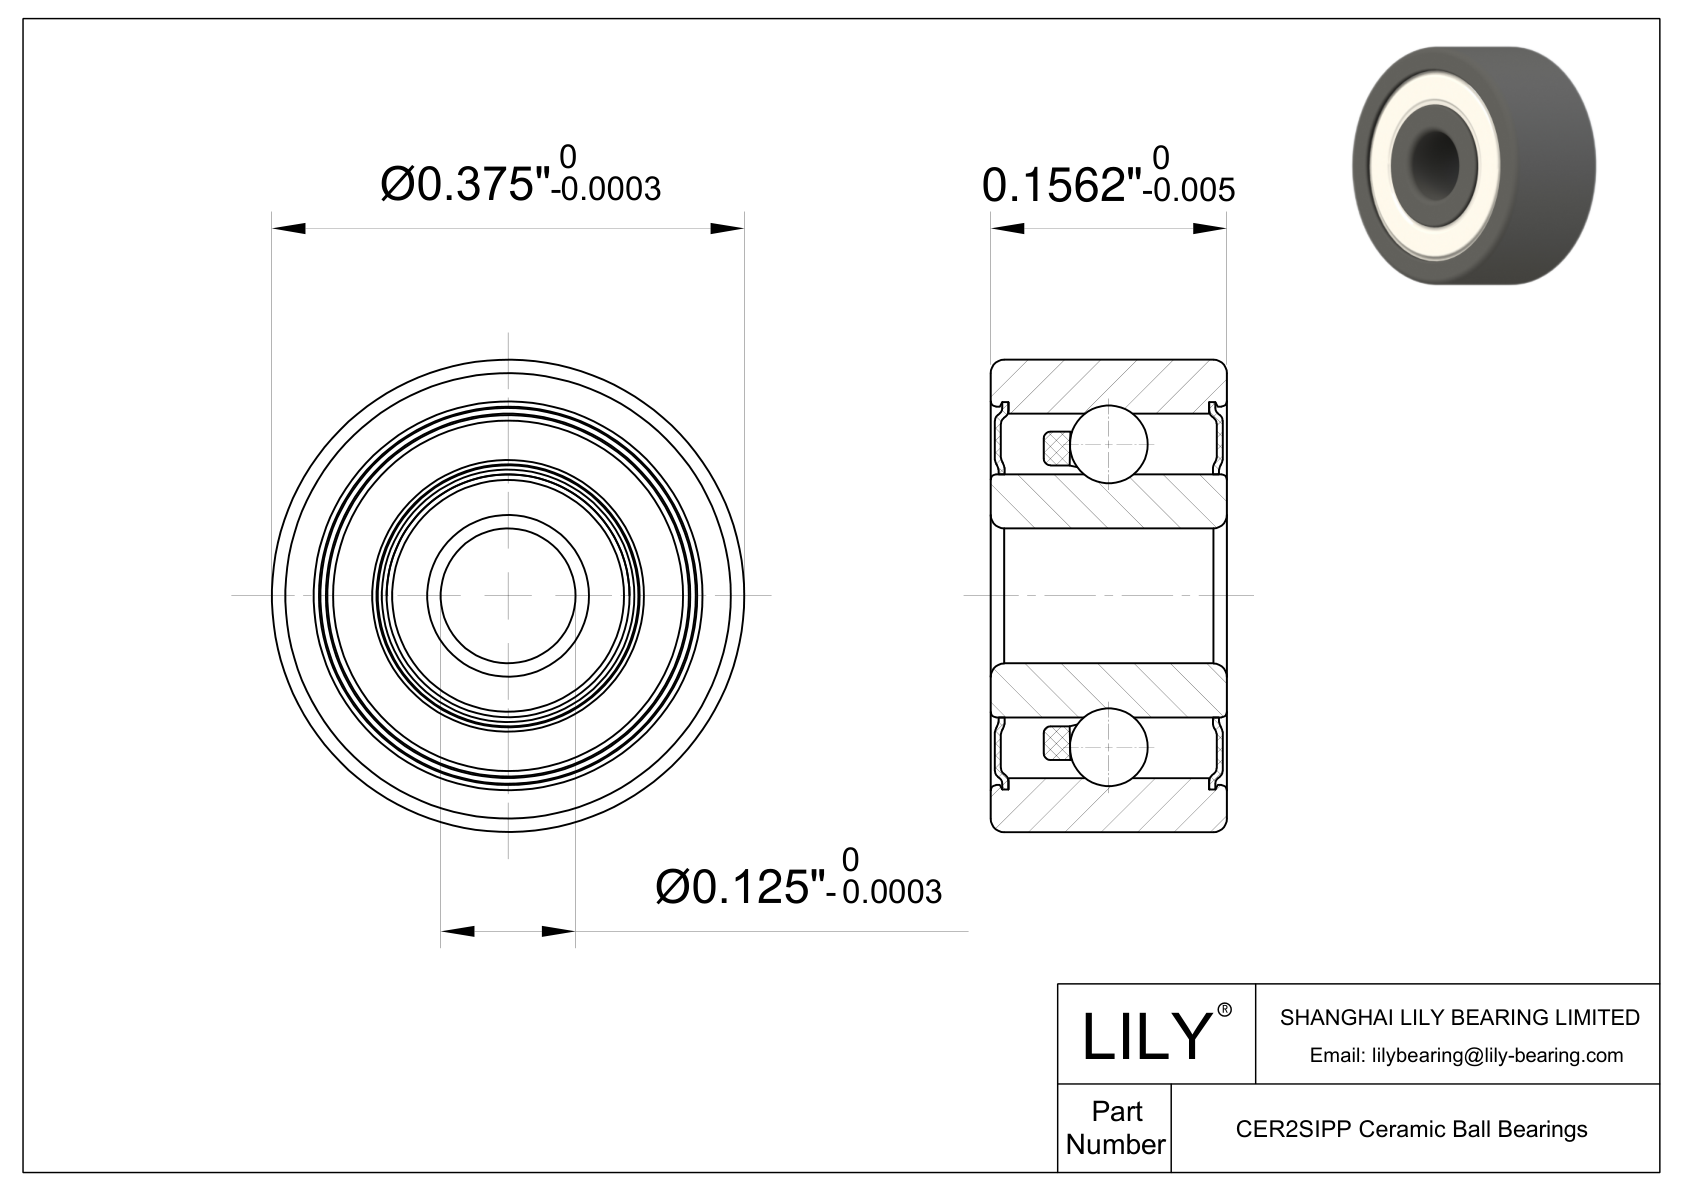 CESI R2 2RS Inch Size Silicon Nitride Ceramic Bearings cad drawing